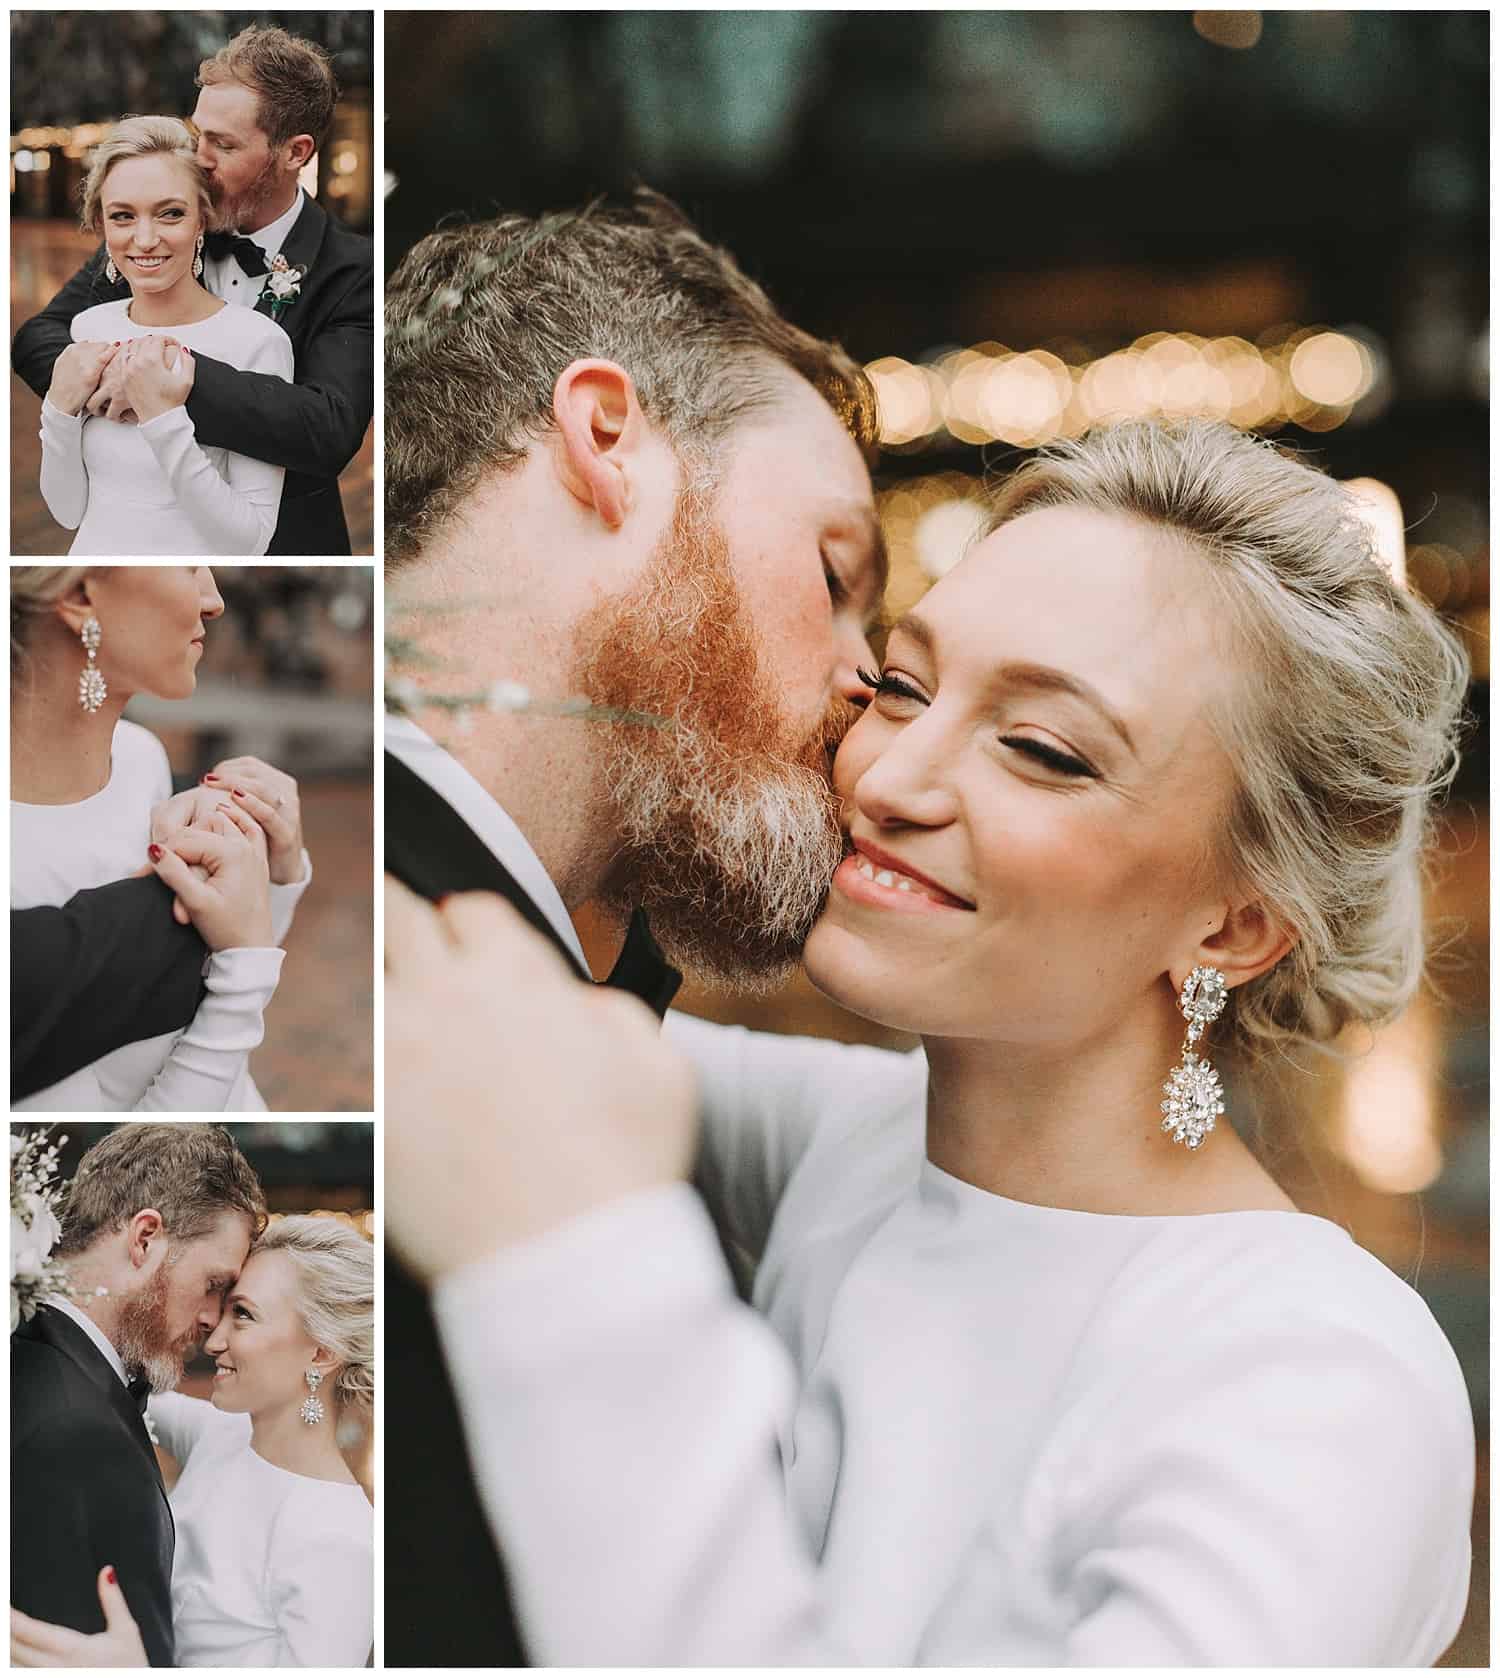 Axis Pioneer Square wedding & portraits in Occidental Square Seattle by Kyle Goldie of Luma Weddings